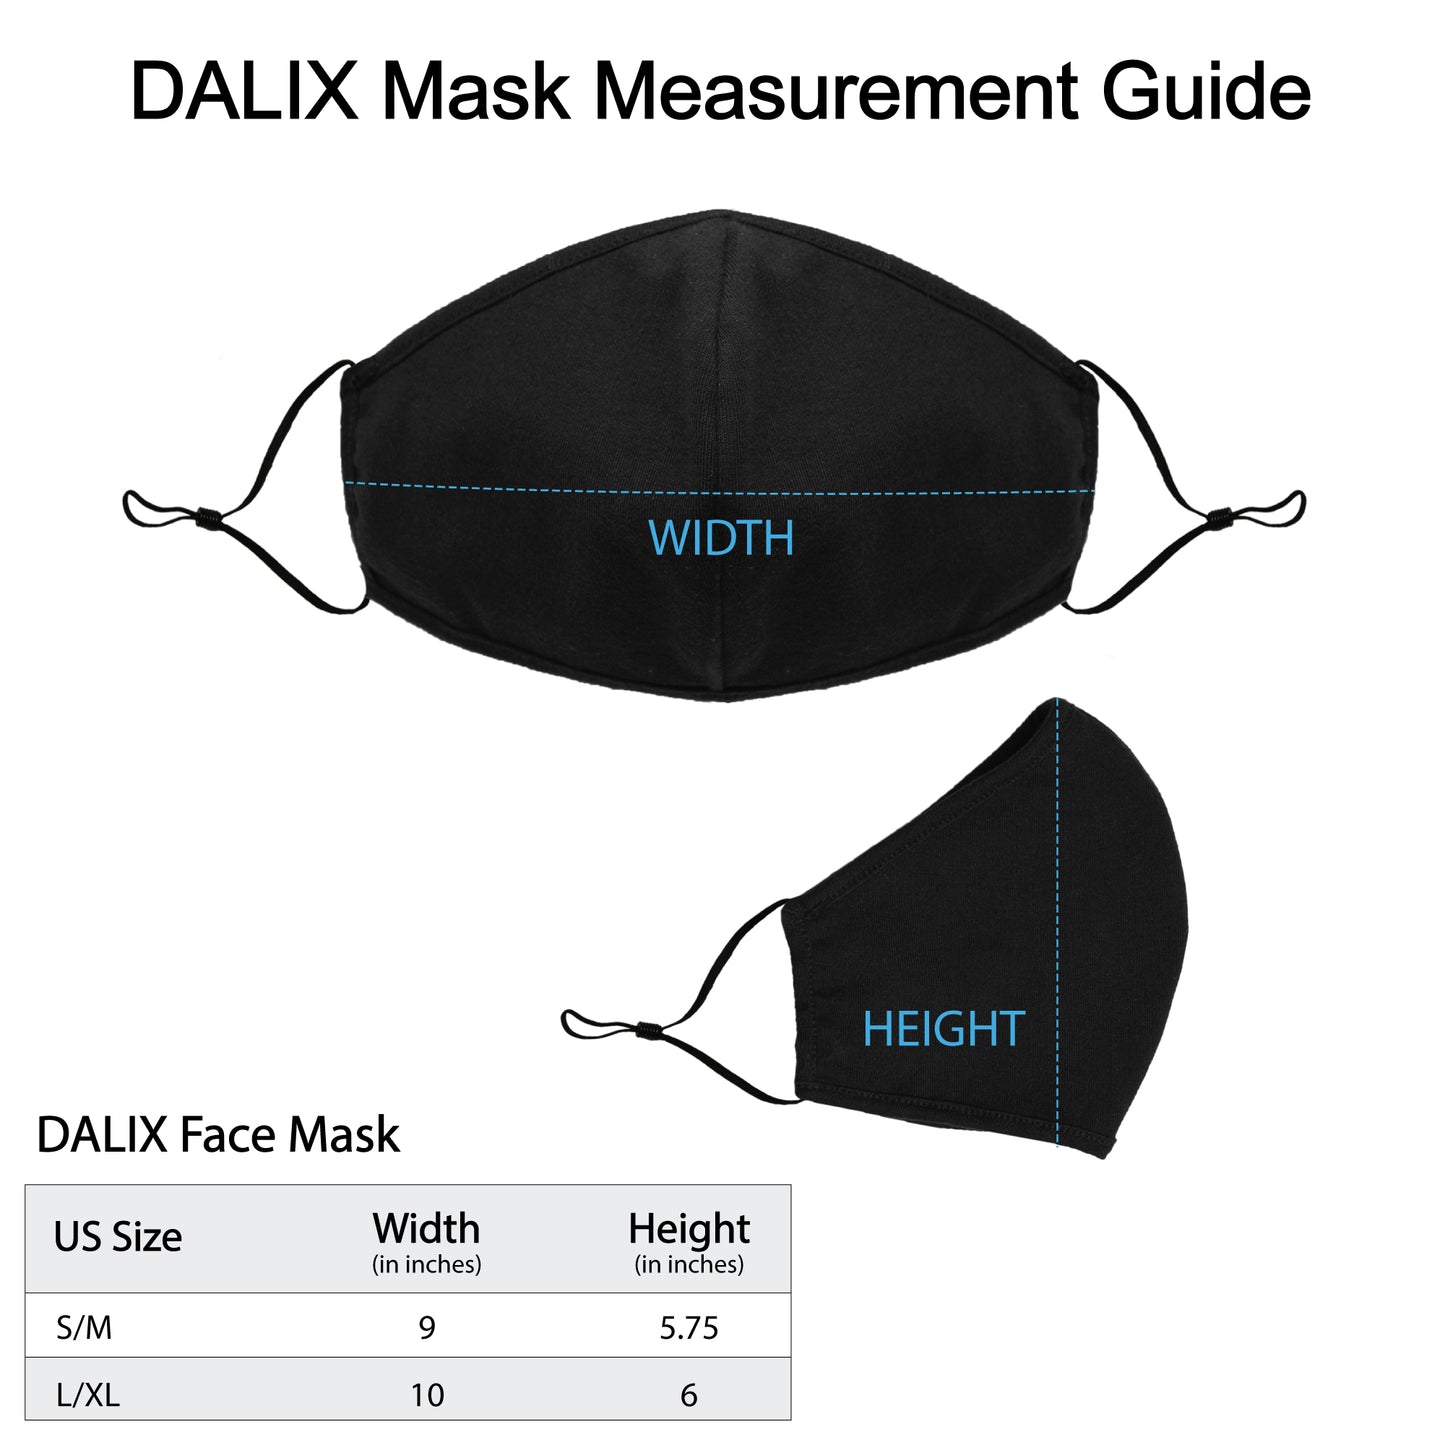 DALIX Cloth Face Mask Reuseable Washable Made in USA - S-M, L-XL Size (10 Pack)